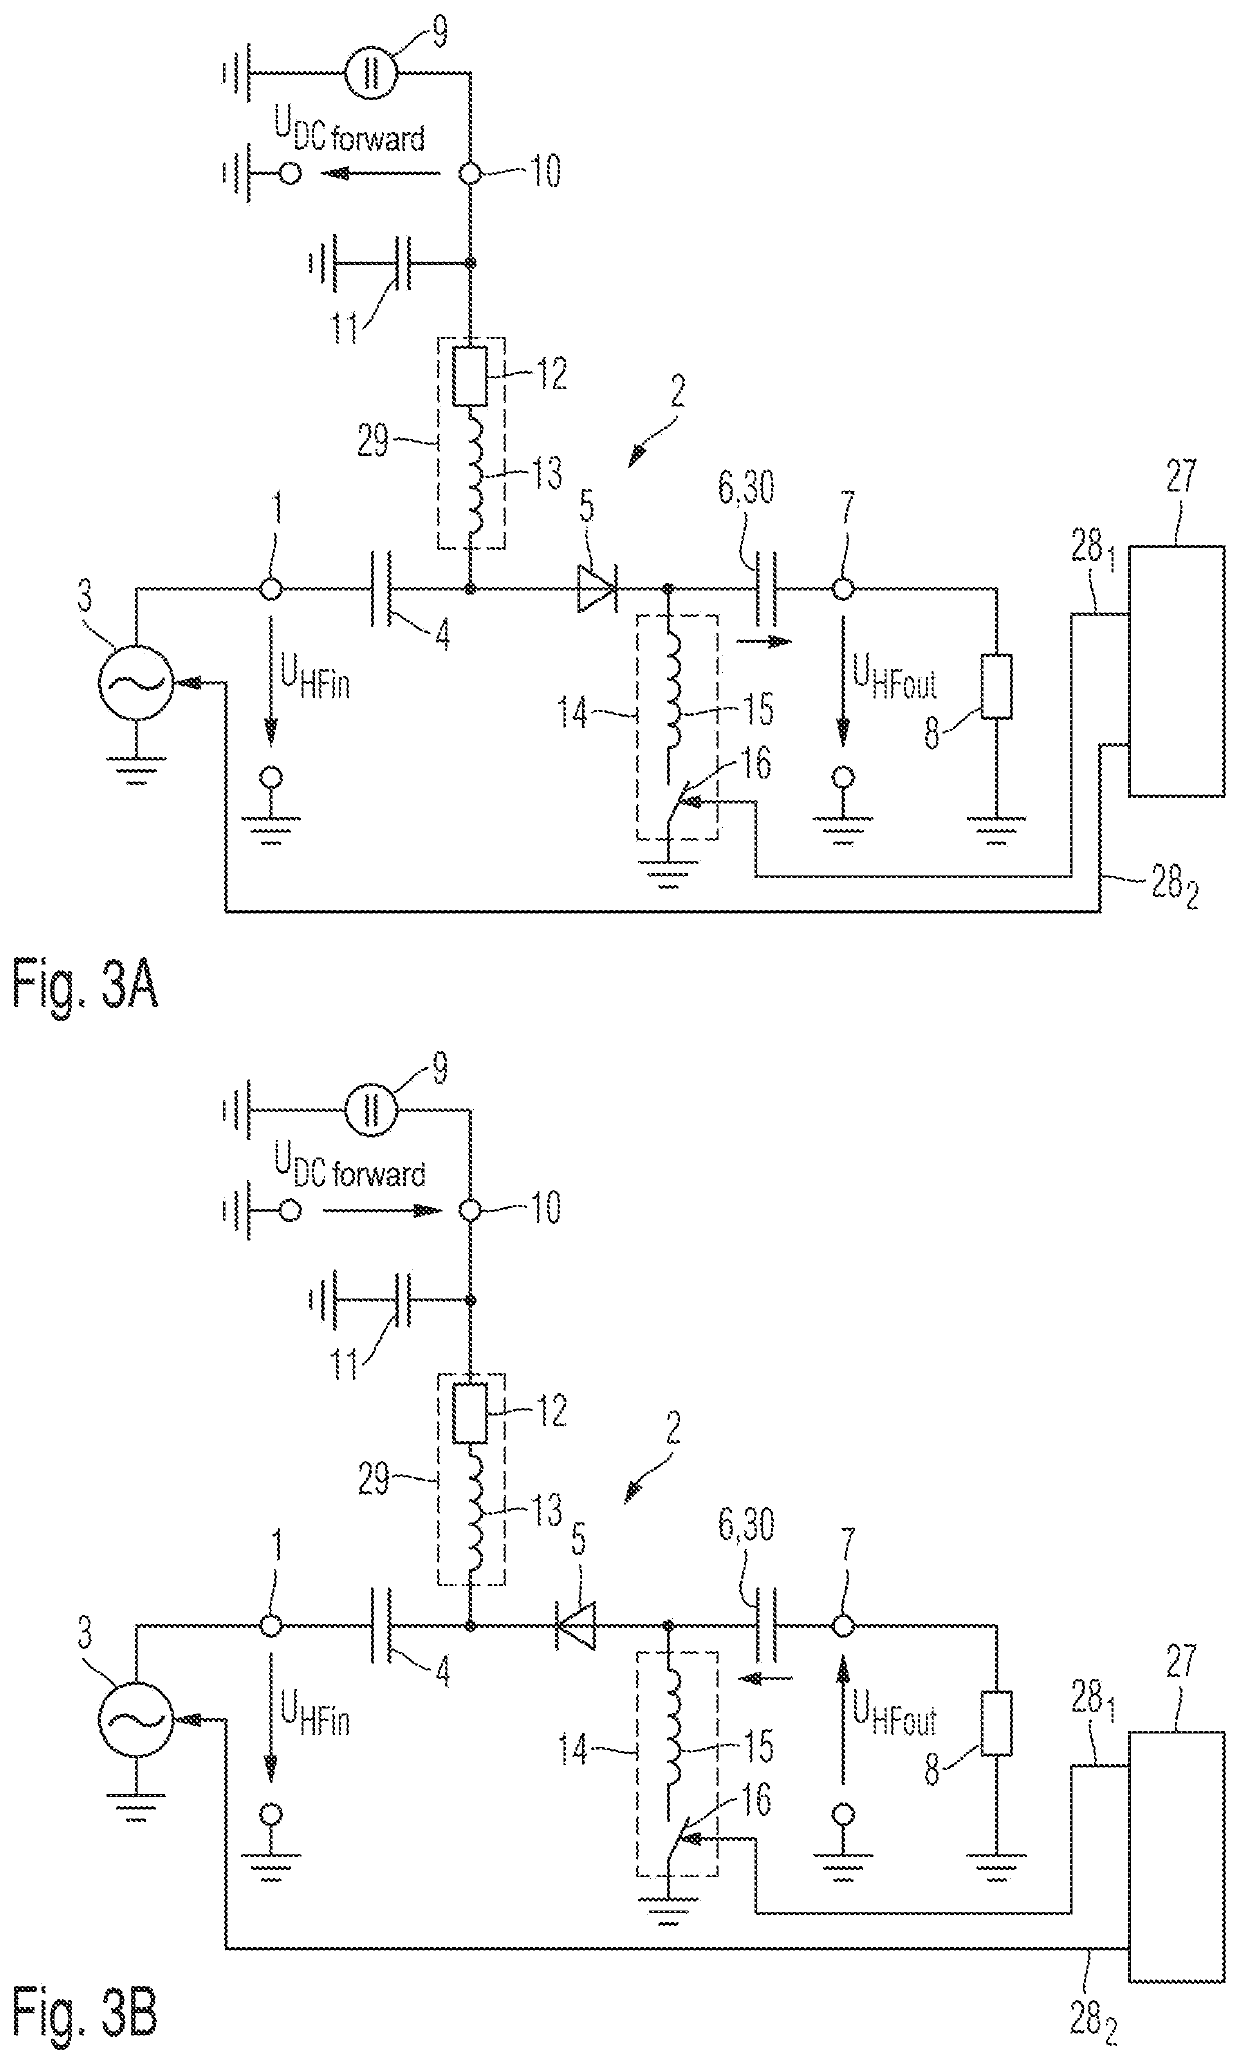 Circuit for switching an AC voltage